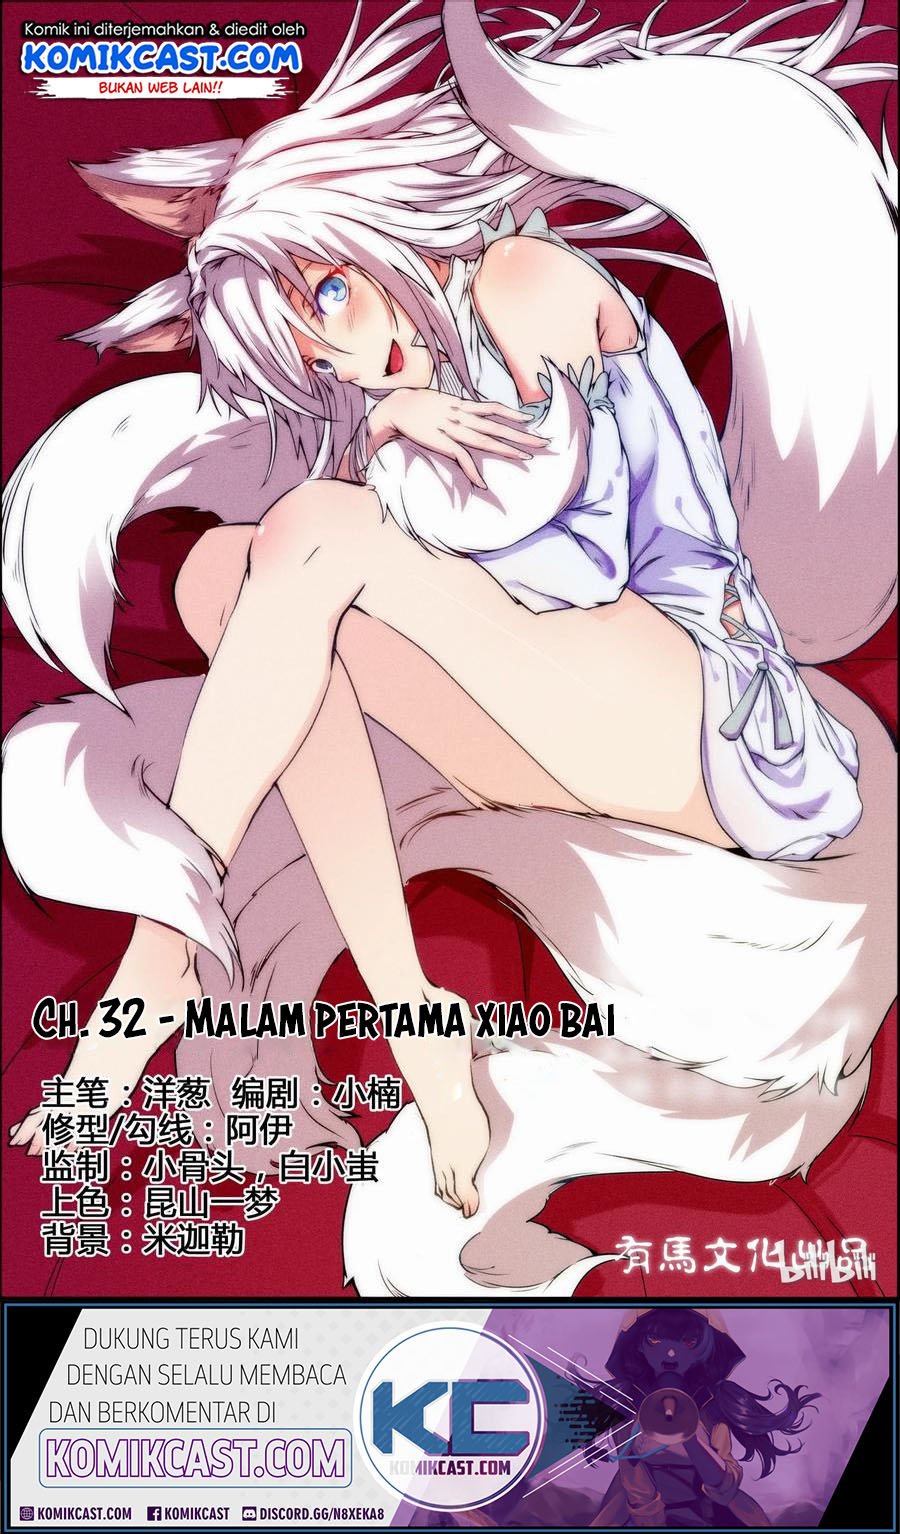 My Wife Is a Fox Spirit Chapter 32